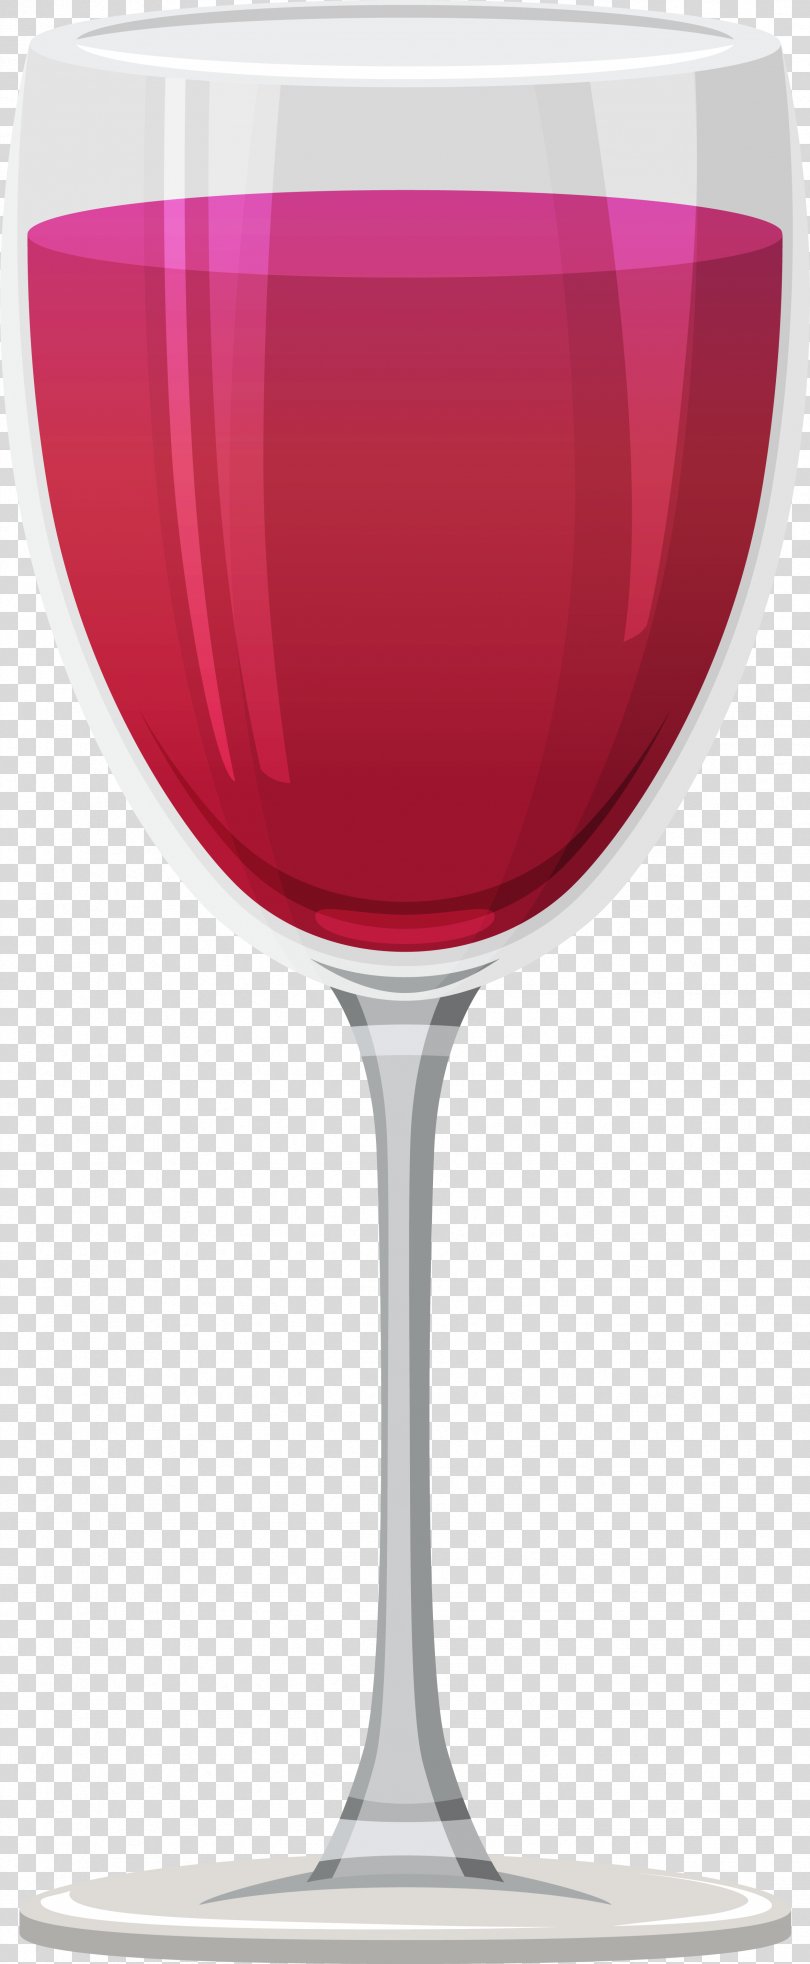 Red Wine White Wine Wine Glass Clip Art, Glass Image PNG